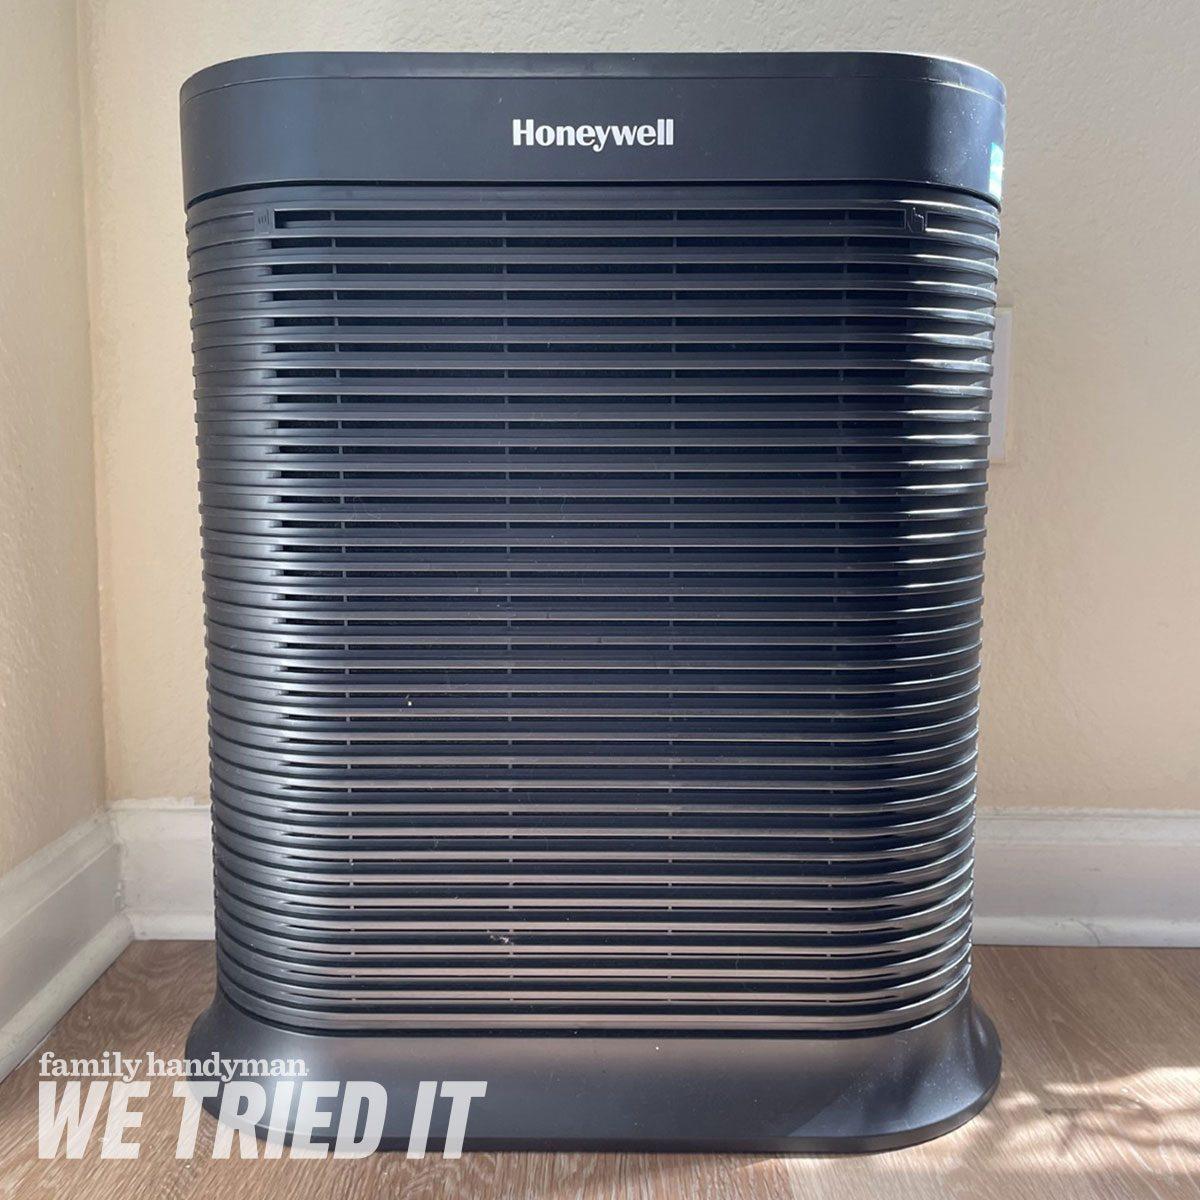 Honeywell HPA300 Air Purifier Review: Excellent for Allergies